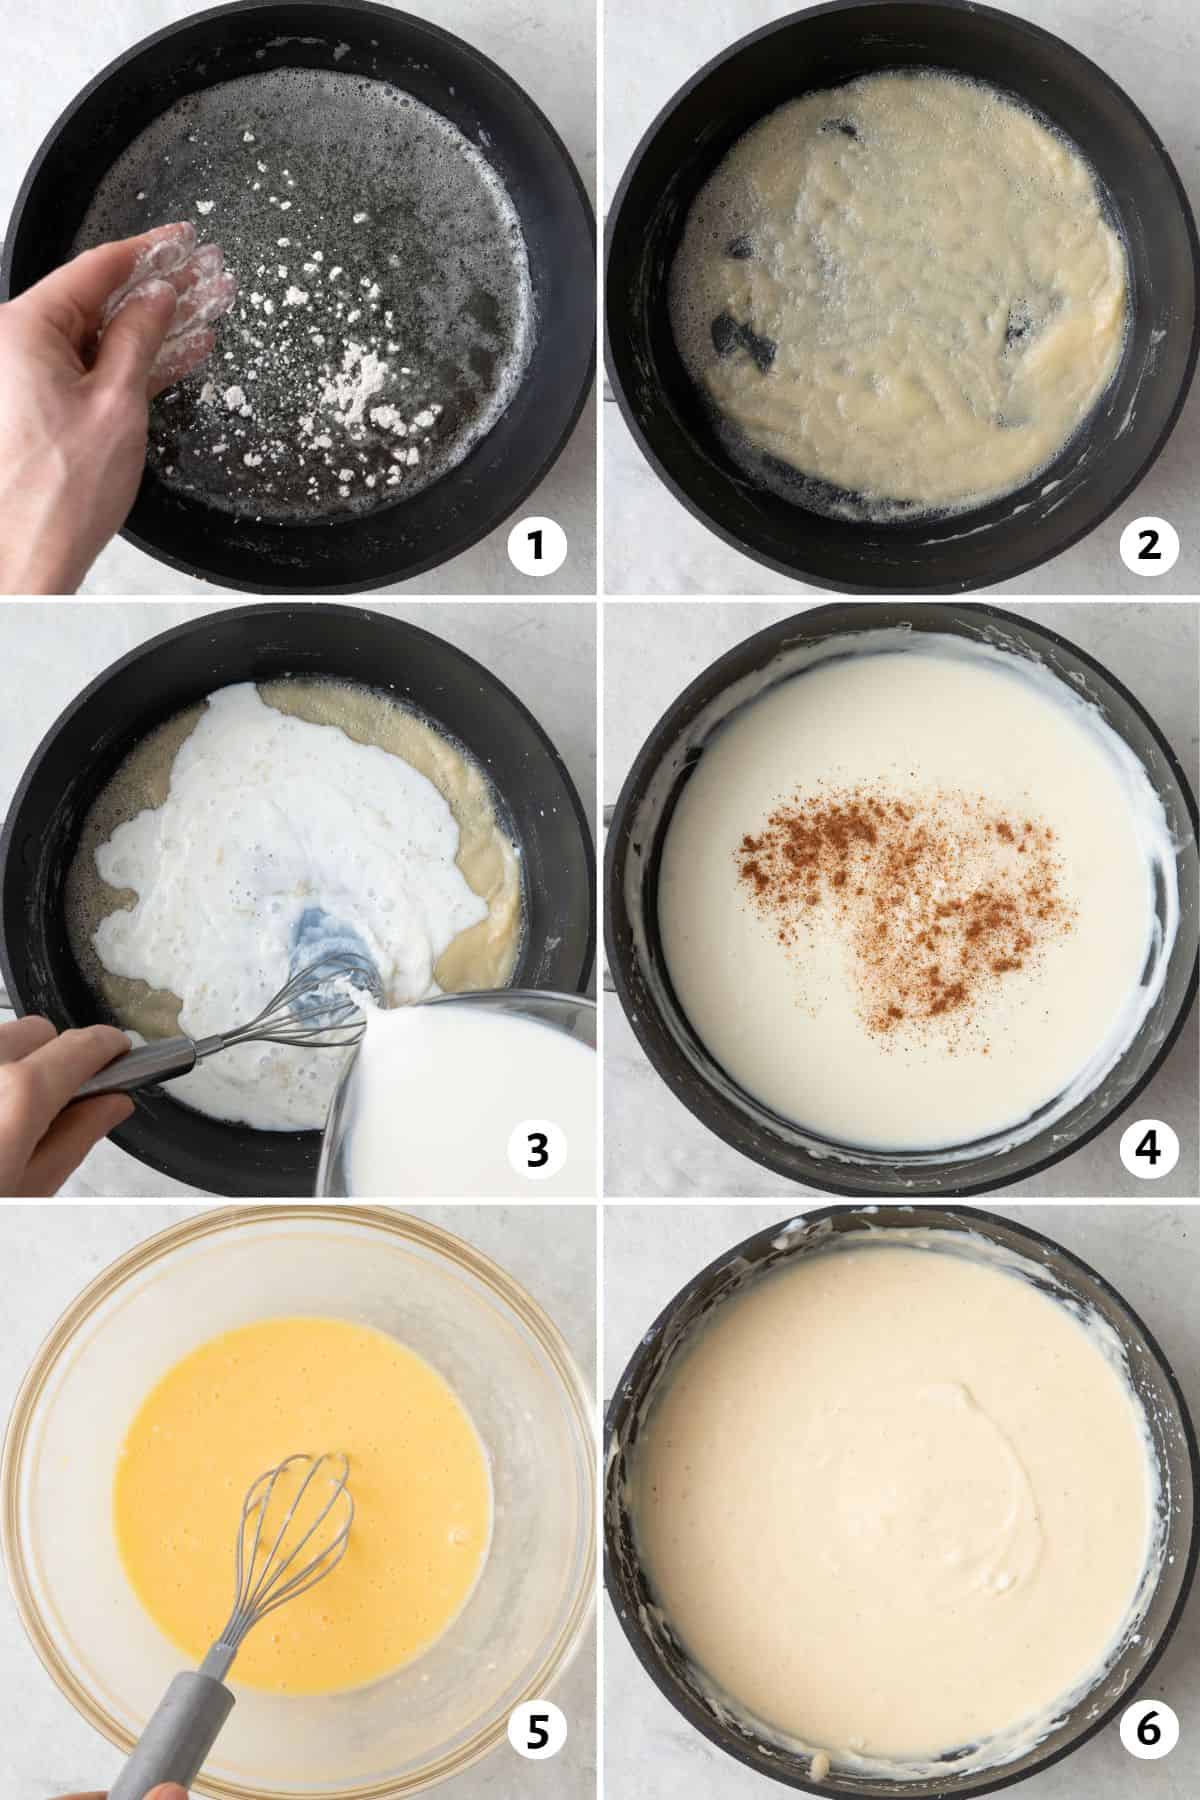 6 image collage making bechamel sauce: 1- flour sprinkled into a skillet with melted butter, 2- roux after cooking, 3-whisking in milk, 4- sauce after combined with nutmeg sprinkled on top, 5- egg whisked in a bowl, 6- egg cooked into sauce.